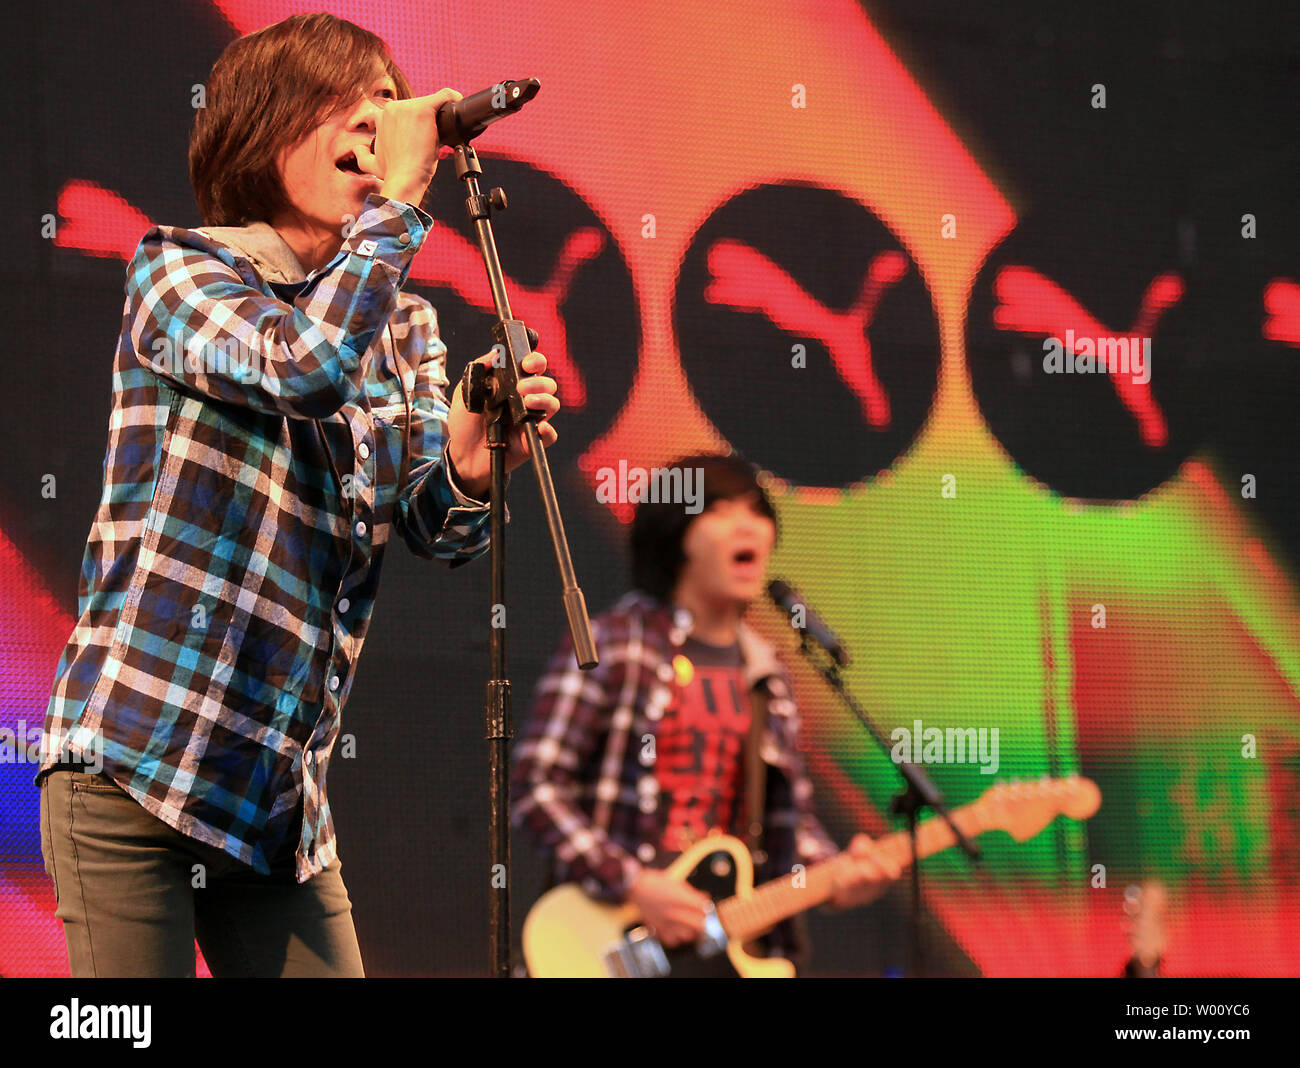 A Chinese rock band hired by Puma, a leading sports lifestyle company,  plays American music covers during a public marketing event at an  international fashion mall in Beijing November 5, 2011. Foreign